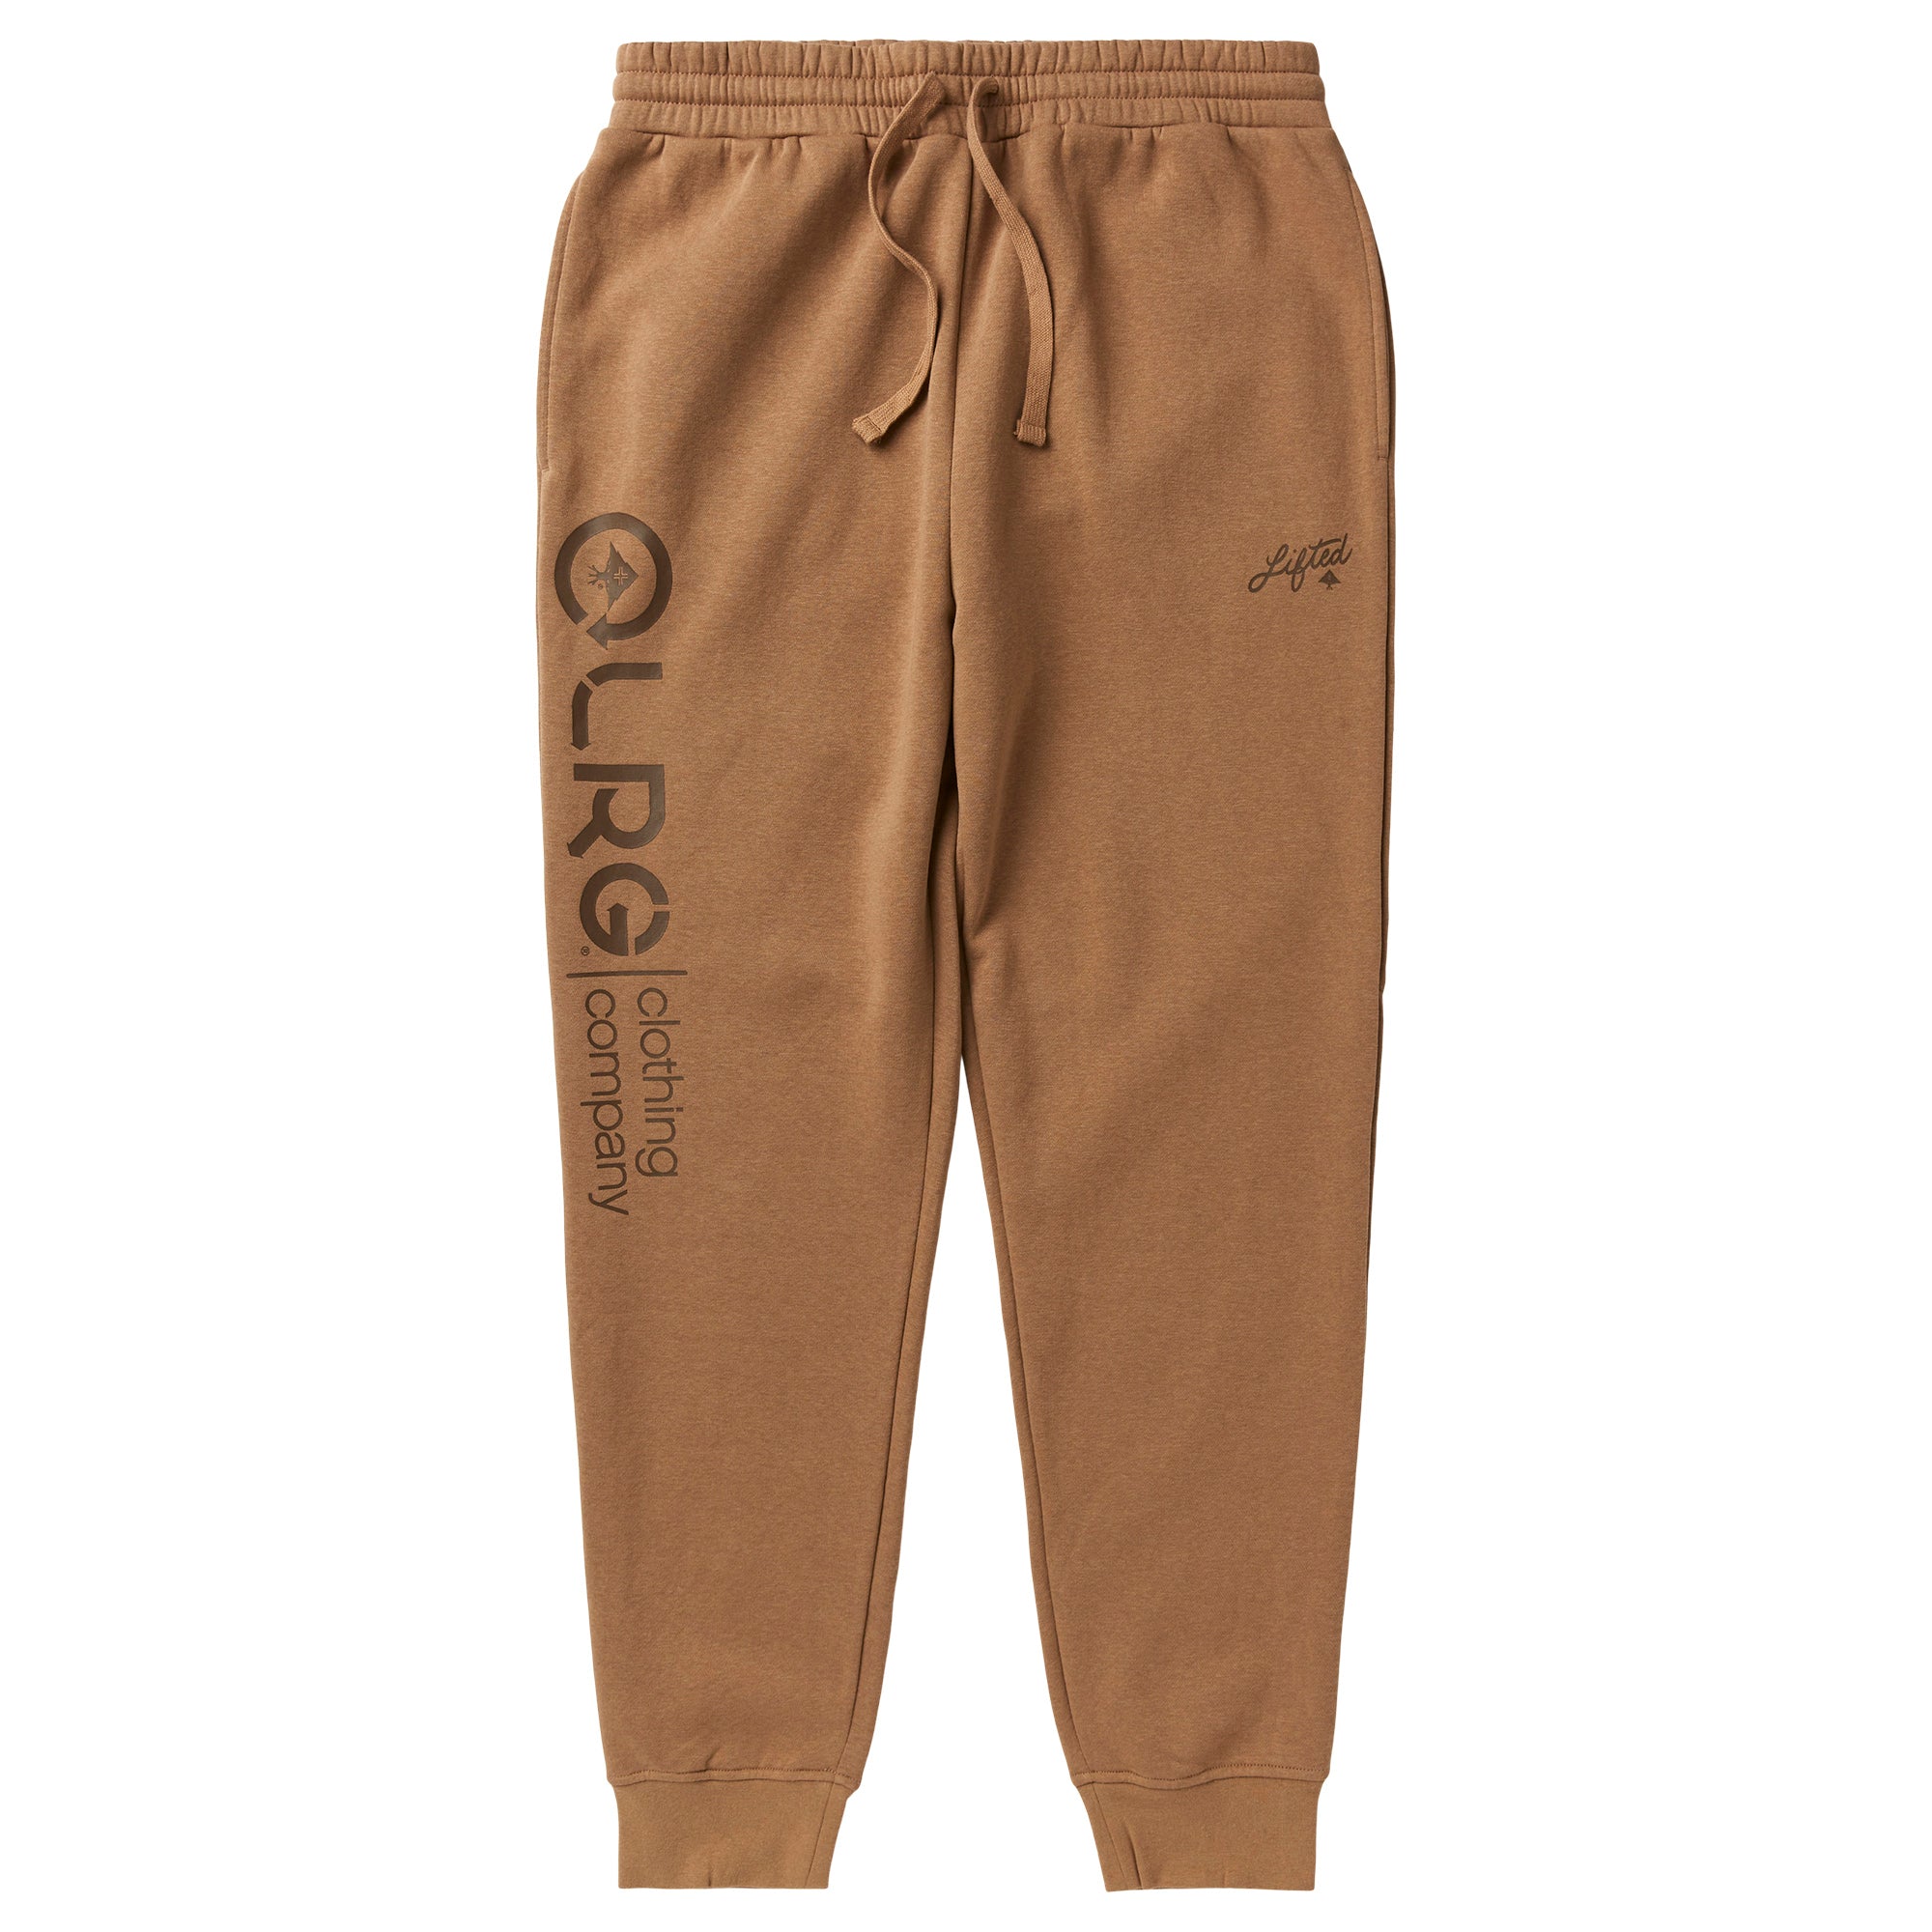 NWT! SKIMS BROWN JOGGER SWEATPANTS SIZE LARGE– WEARHOUSE CONSIGNMENT